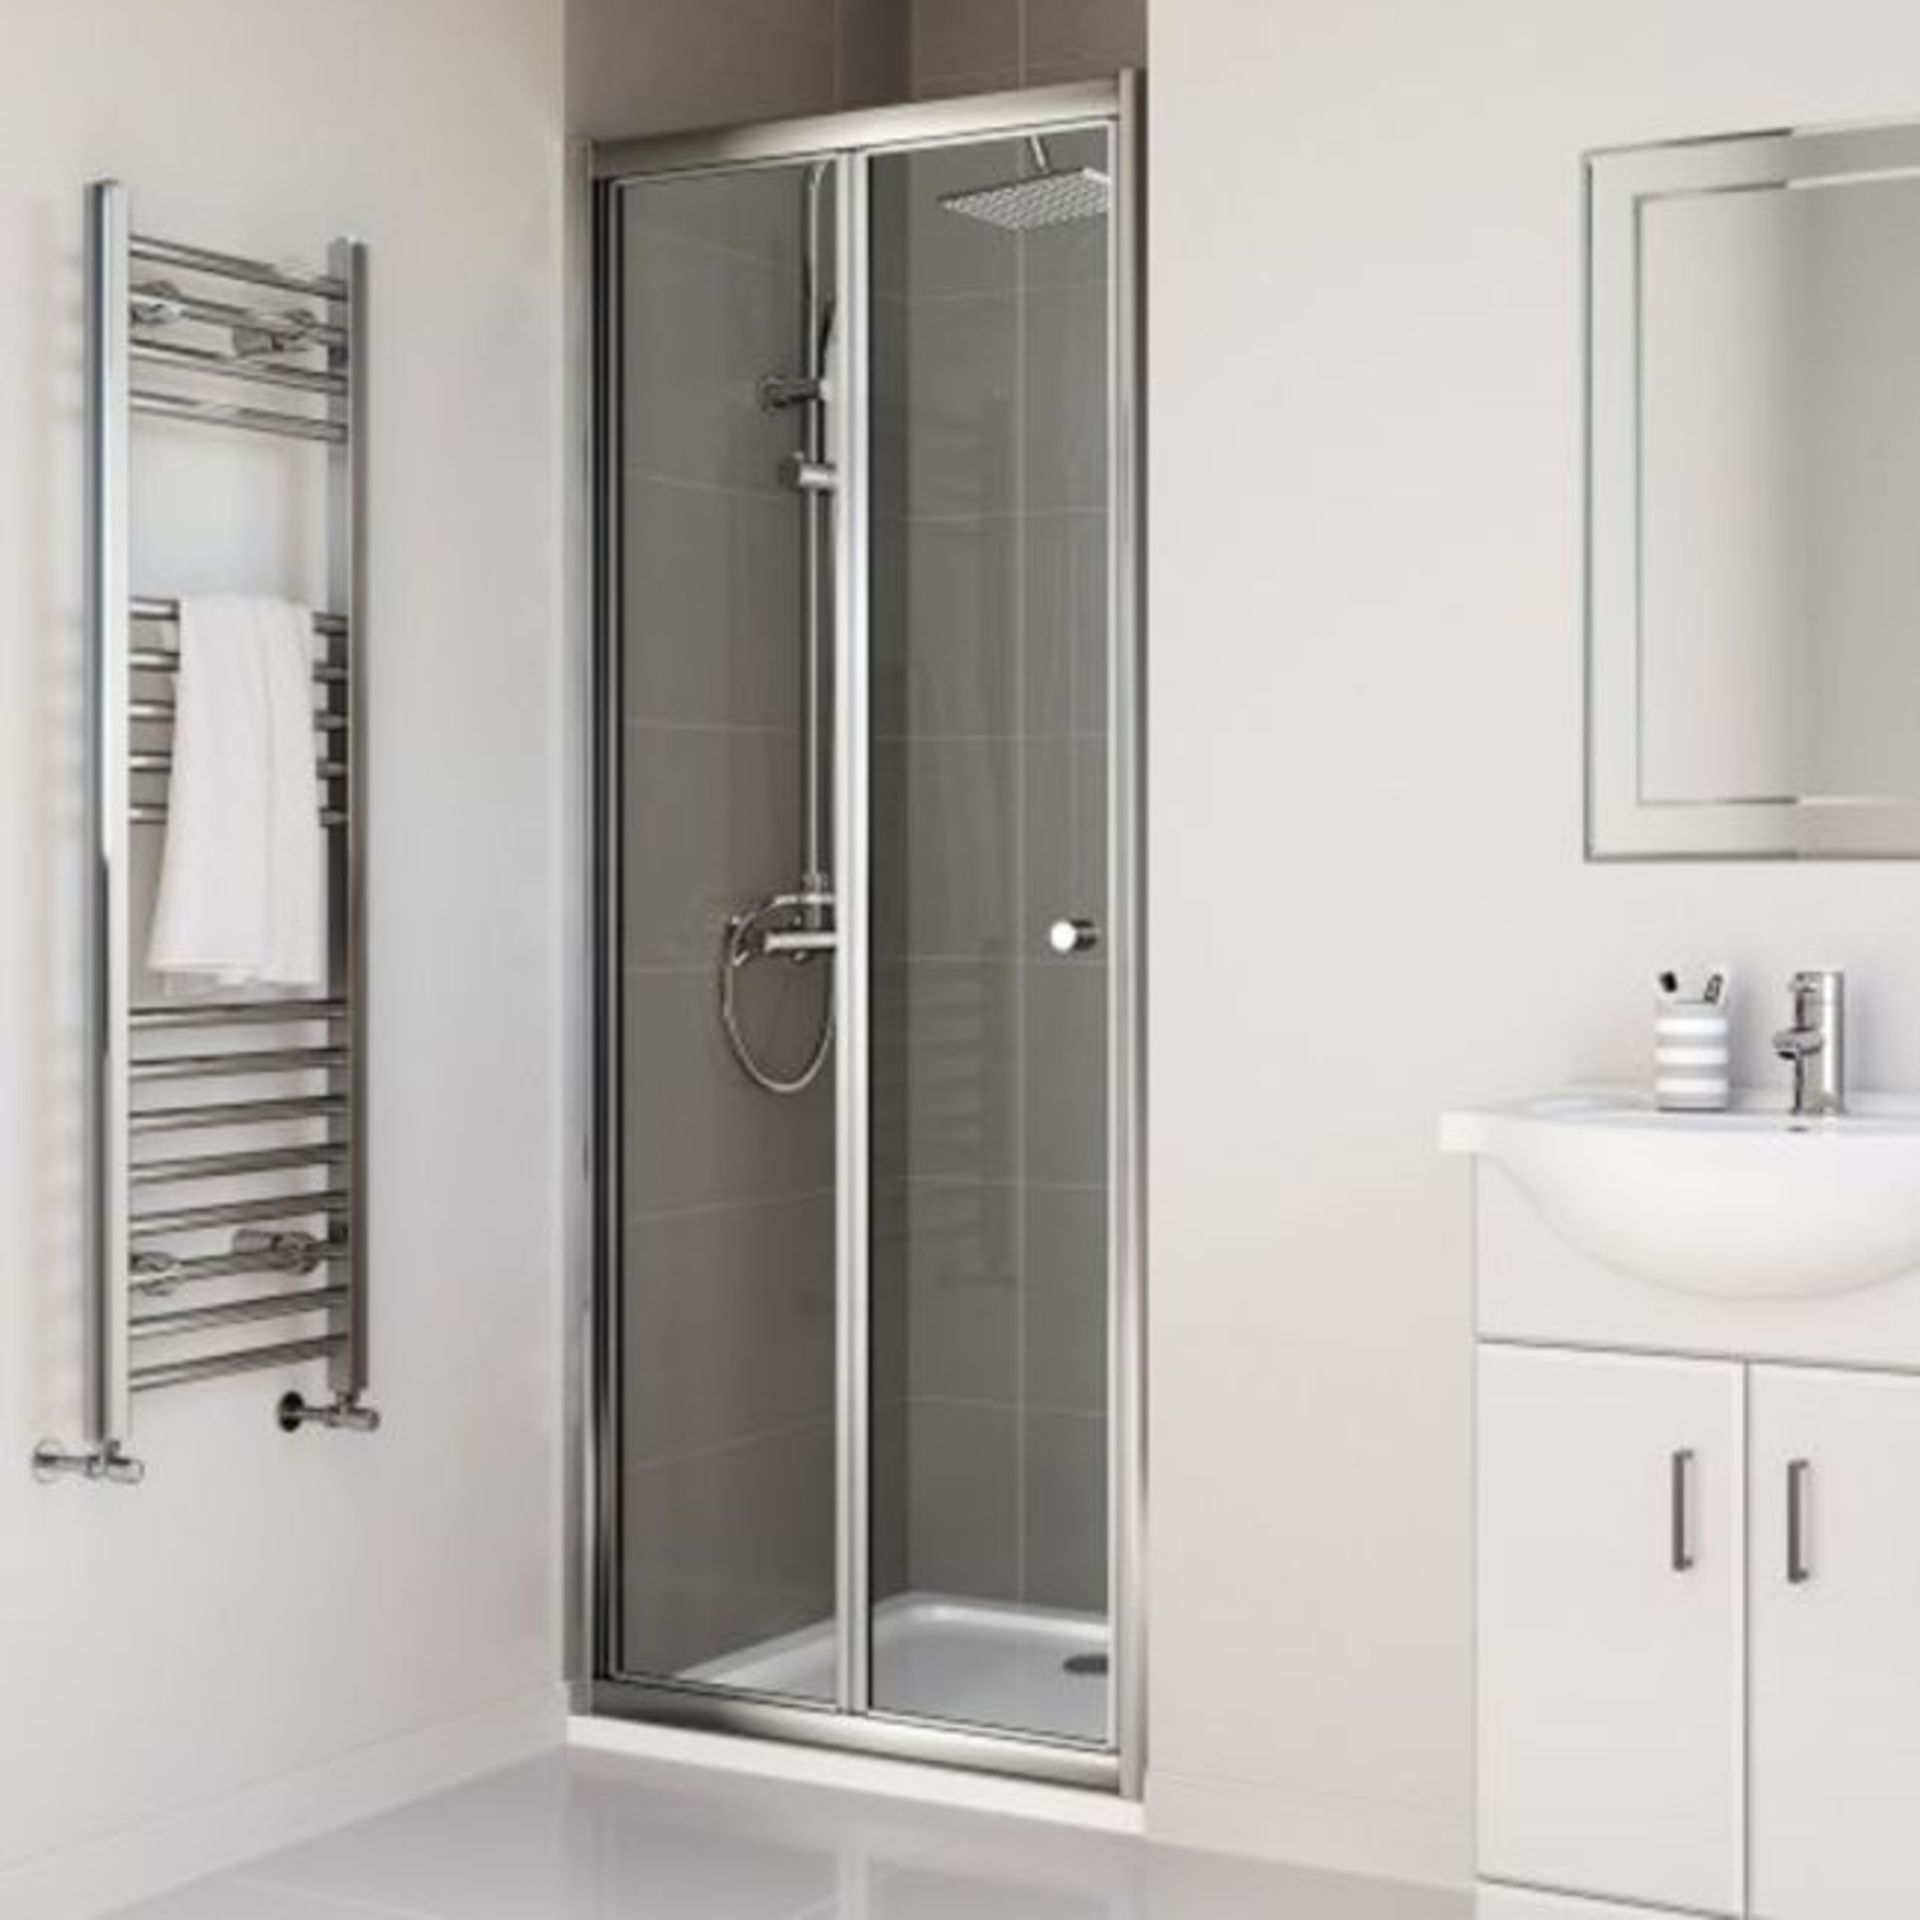 New (E52) 760mm - Elements Bi Fold Shower Door. RRP £299.99. Do You Have An Awkward Nook Or